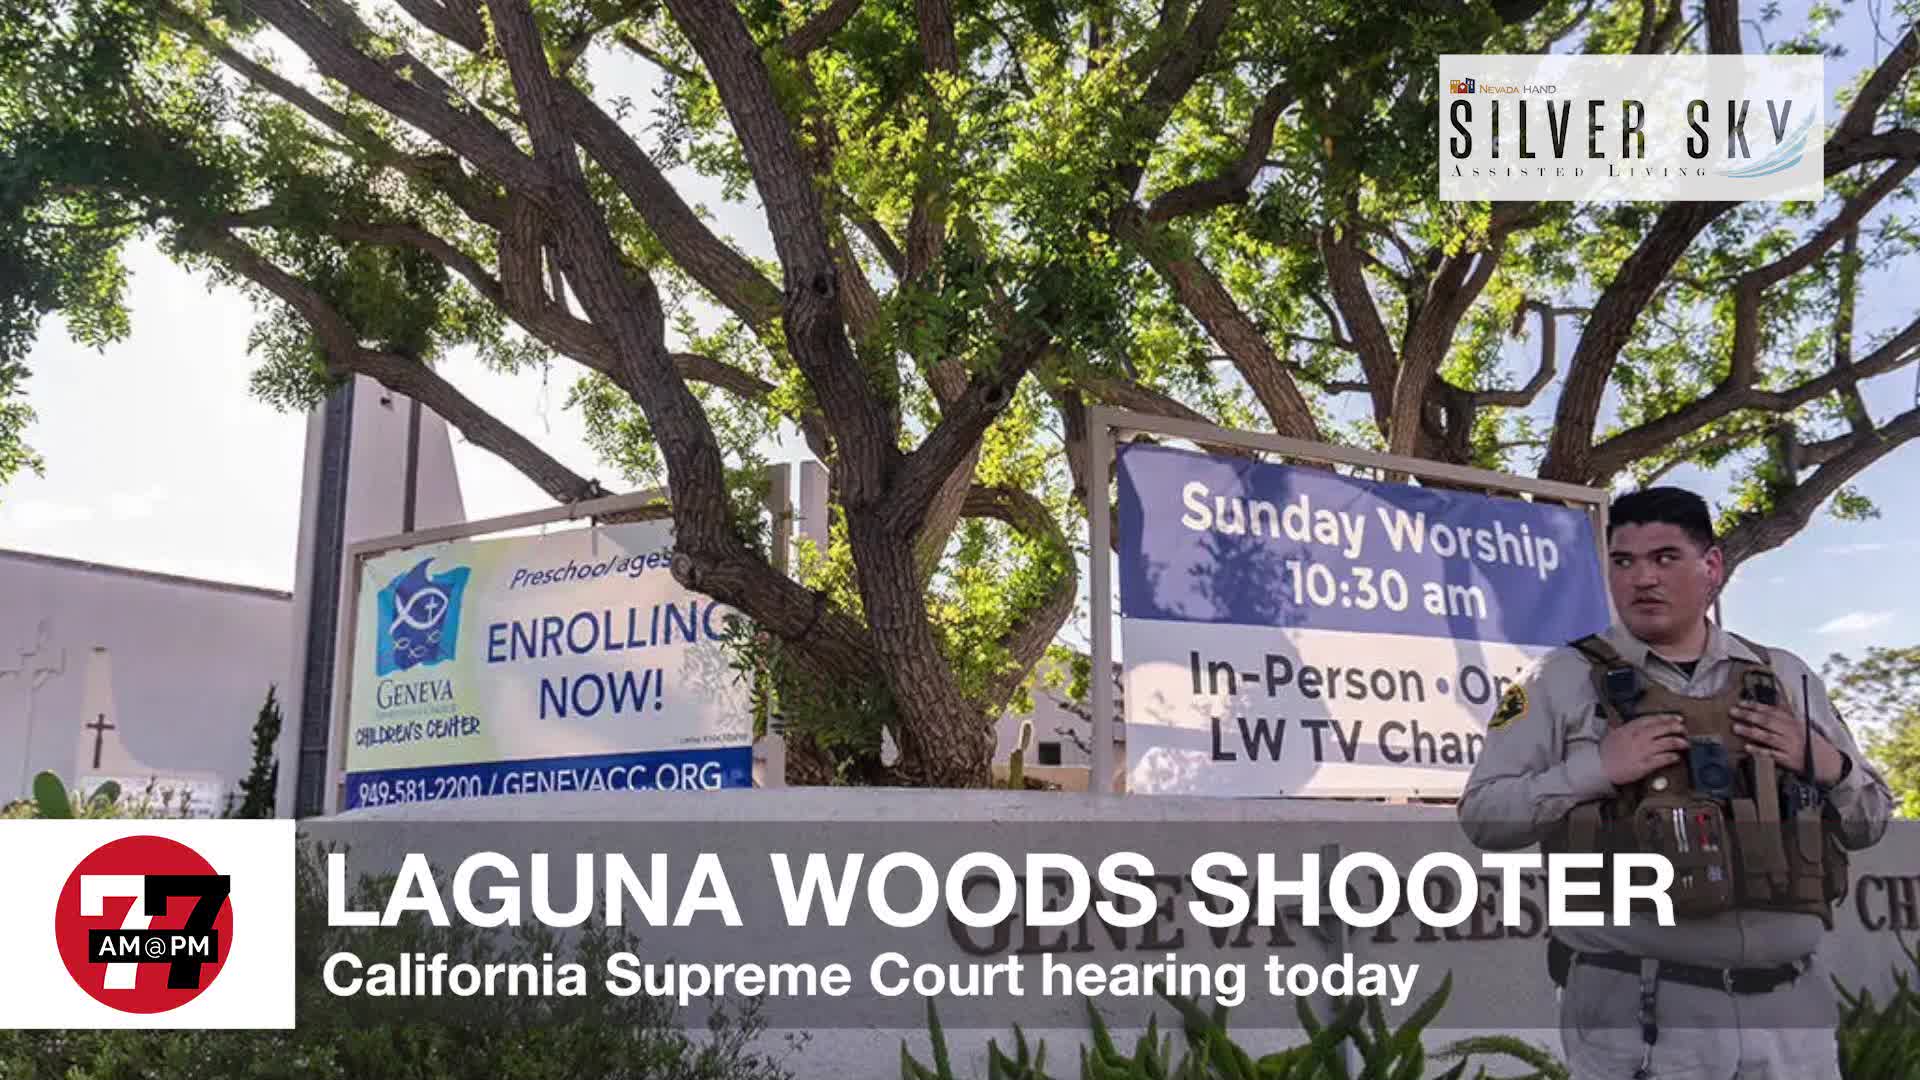 Laguna Woods Shooter in court today